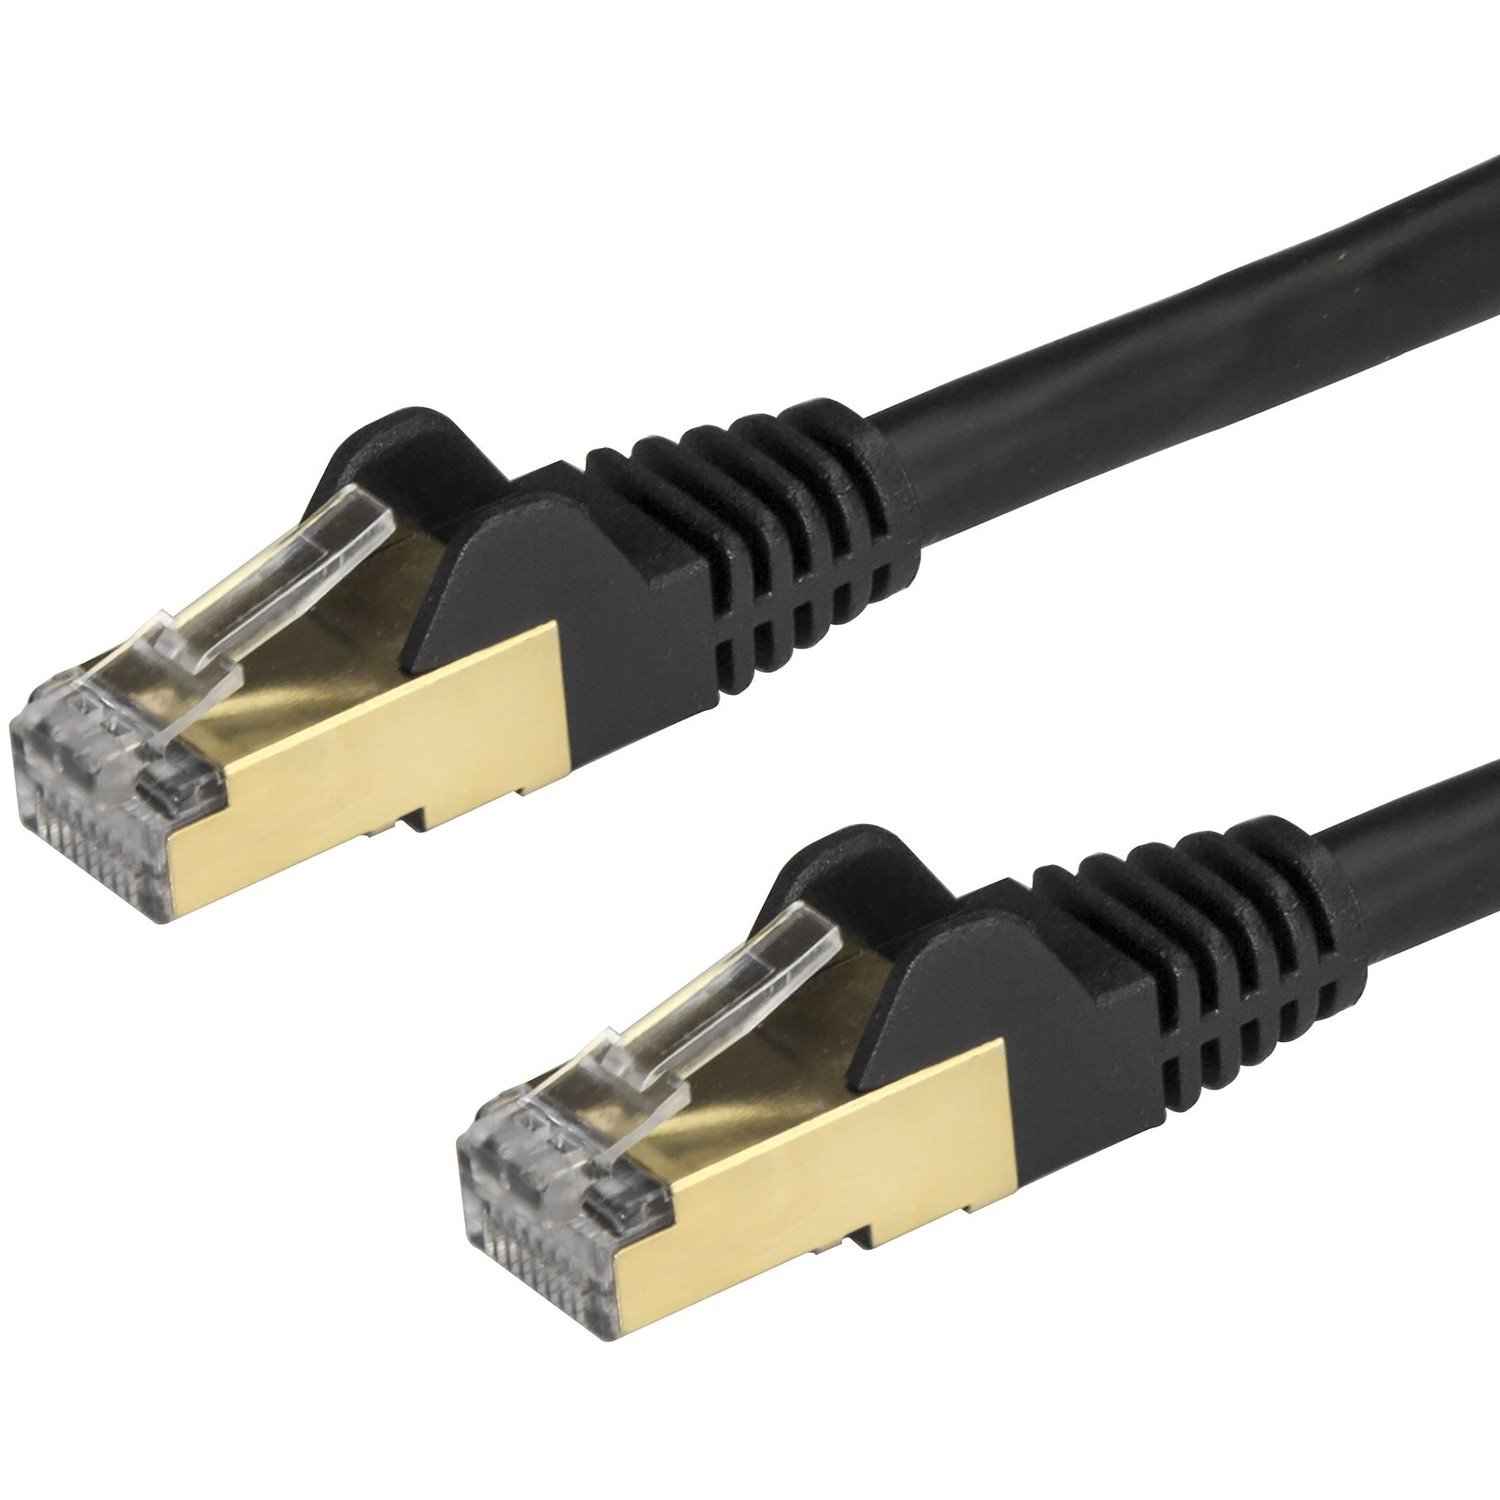 StarTech.com 1 m Category 6a Network Cable for PoE-enabled Device, Computer, Hub, Router, Patch Panel - 1